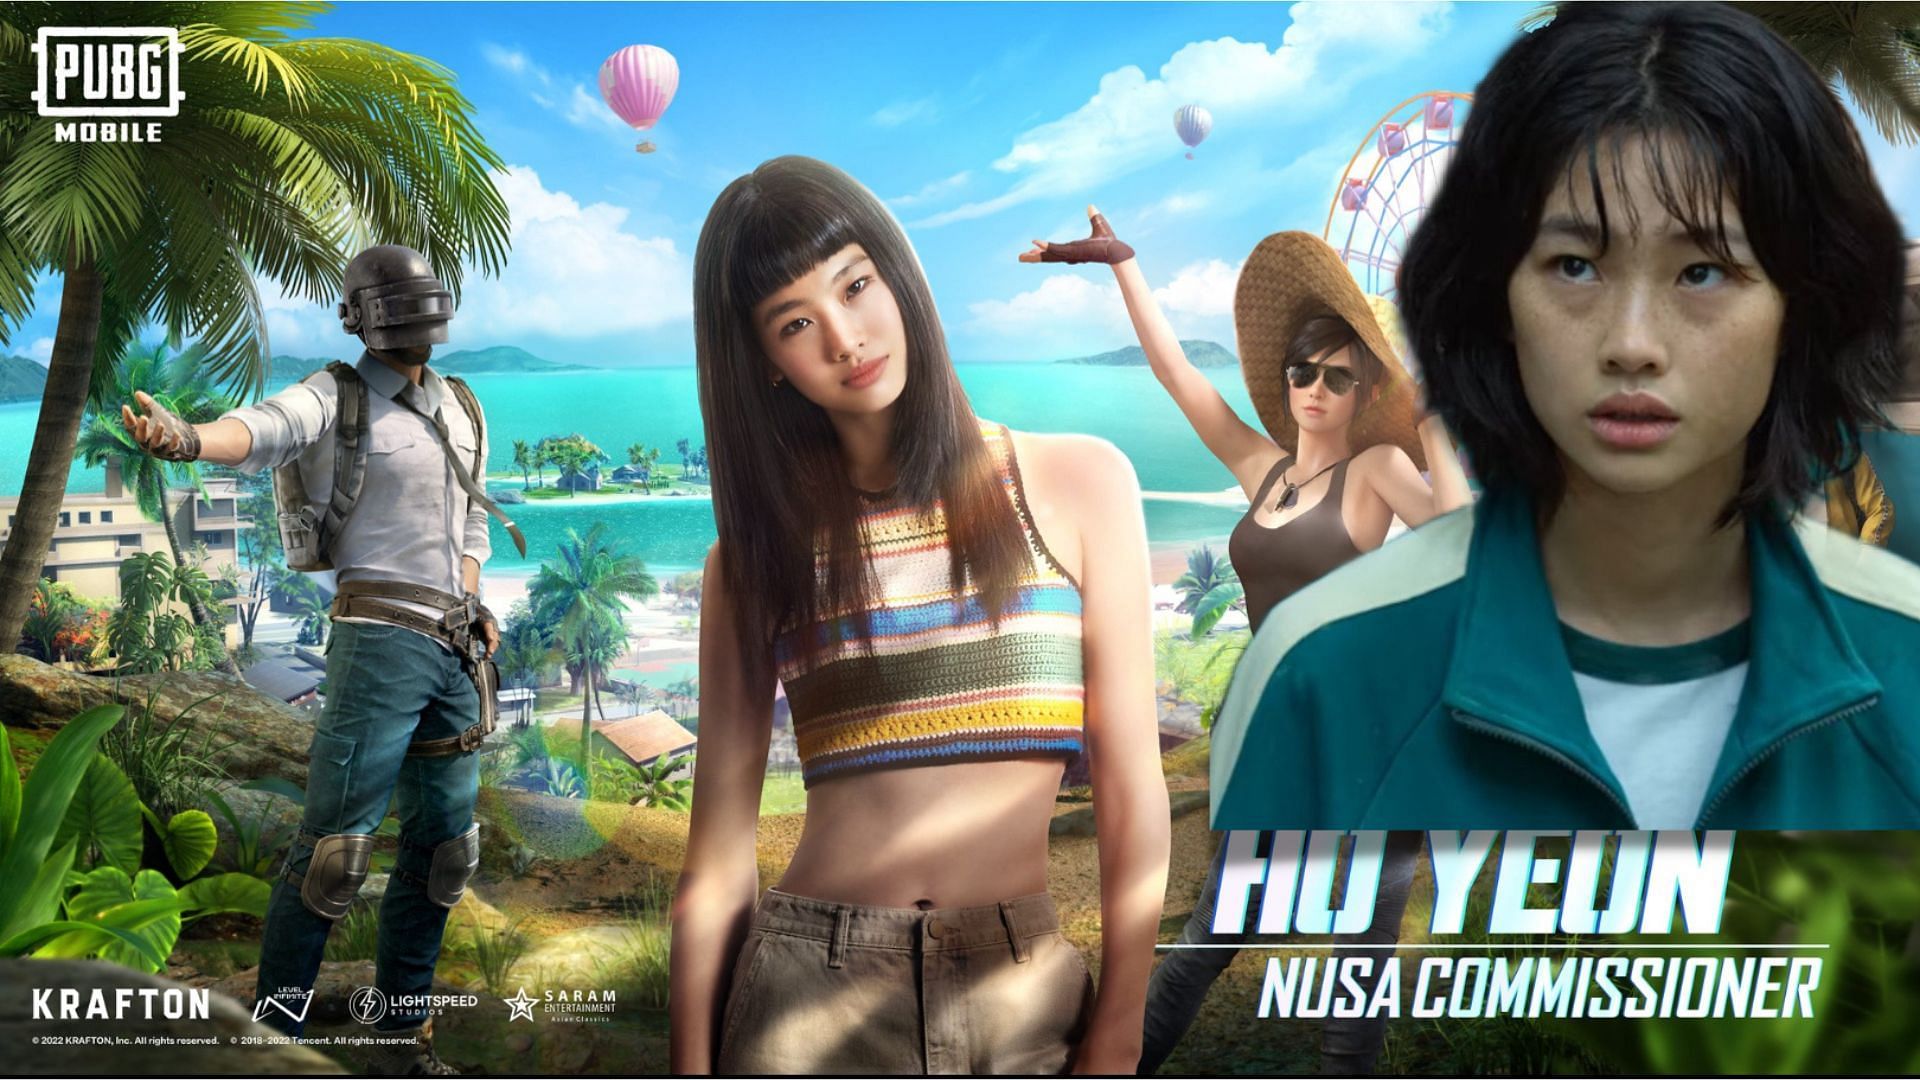 PUBG Mobile announces collaboration with South Korean model and actress Ho Yeon (Image via PUBG Mobile)